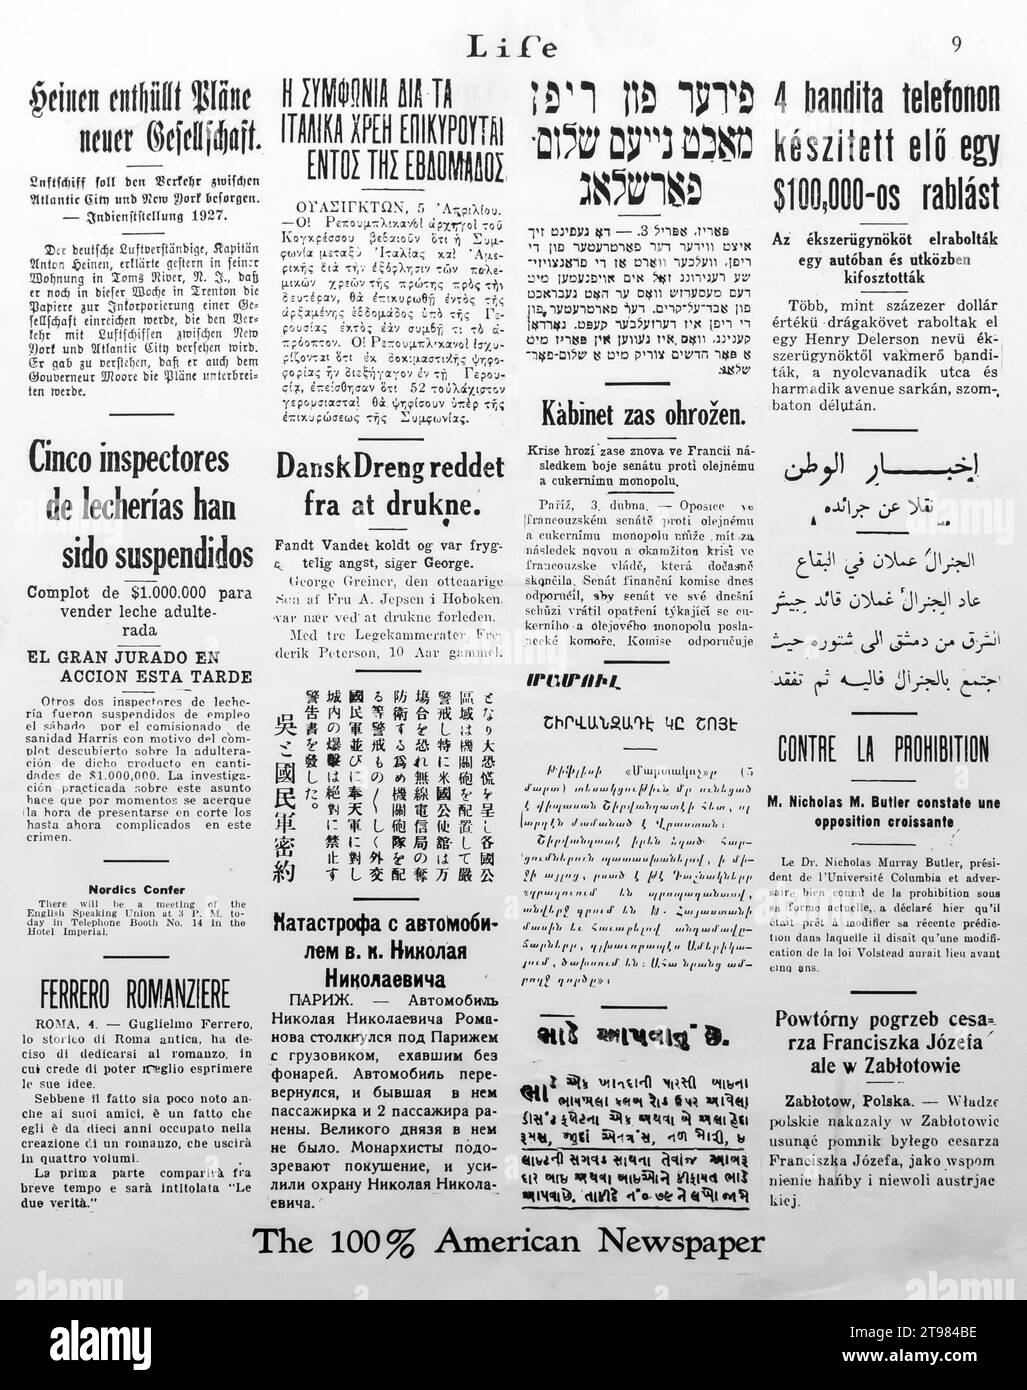 LIFE 100 % American newspaper advertisement with pieces of news articles in various foreign languages Stock Photo